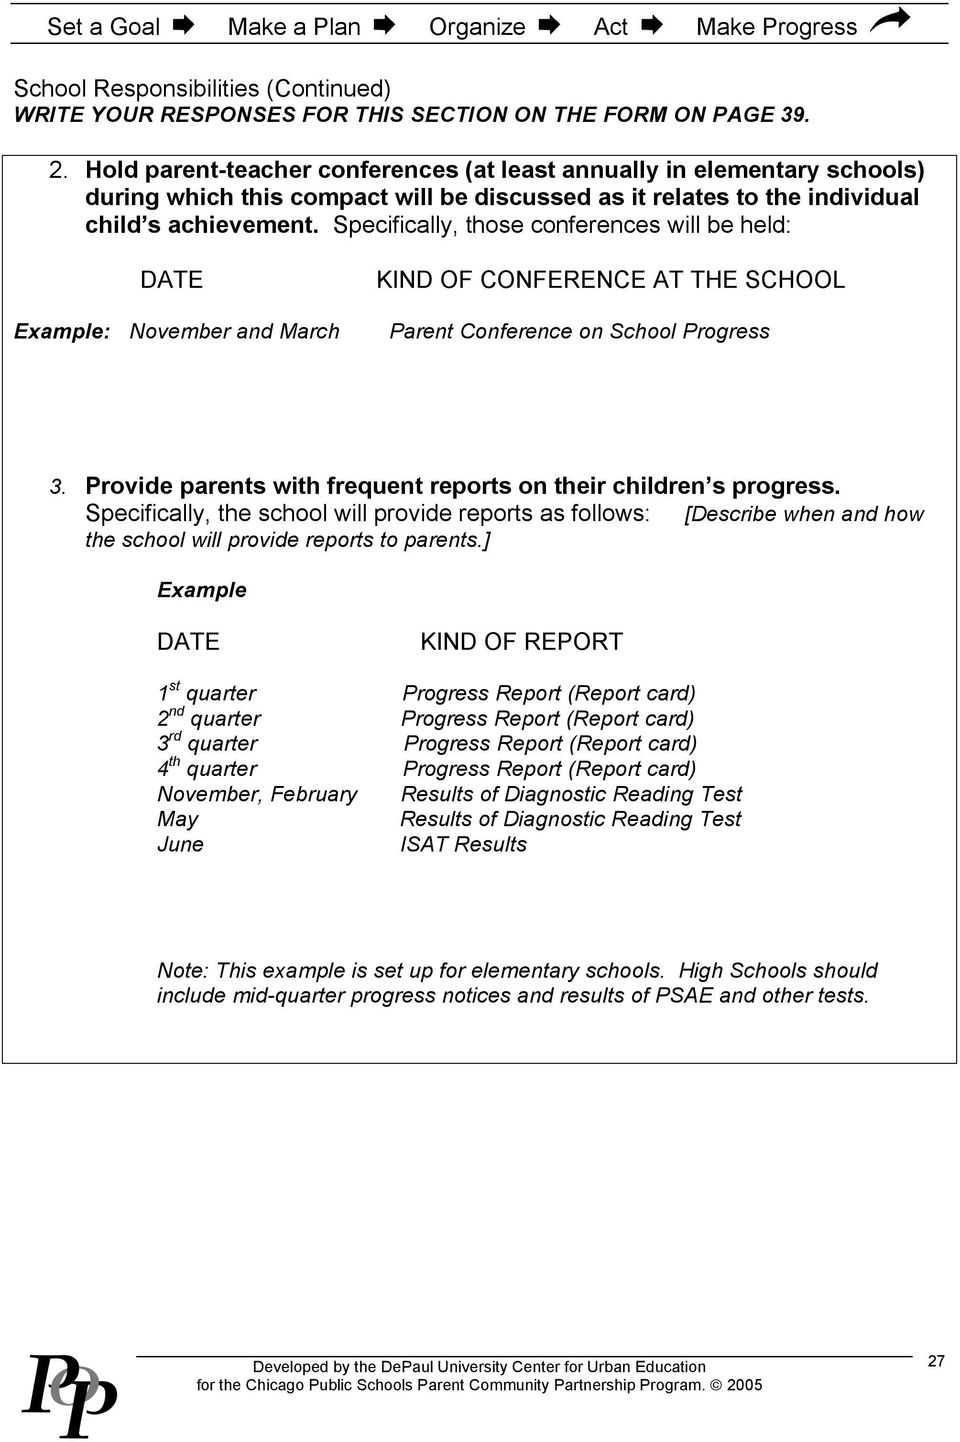 Specifically, those conferences will be held: DATE Example: November and March KIND OF CONFERENCE AT THE SCHOOL Parent Conference on School Progress 3.